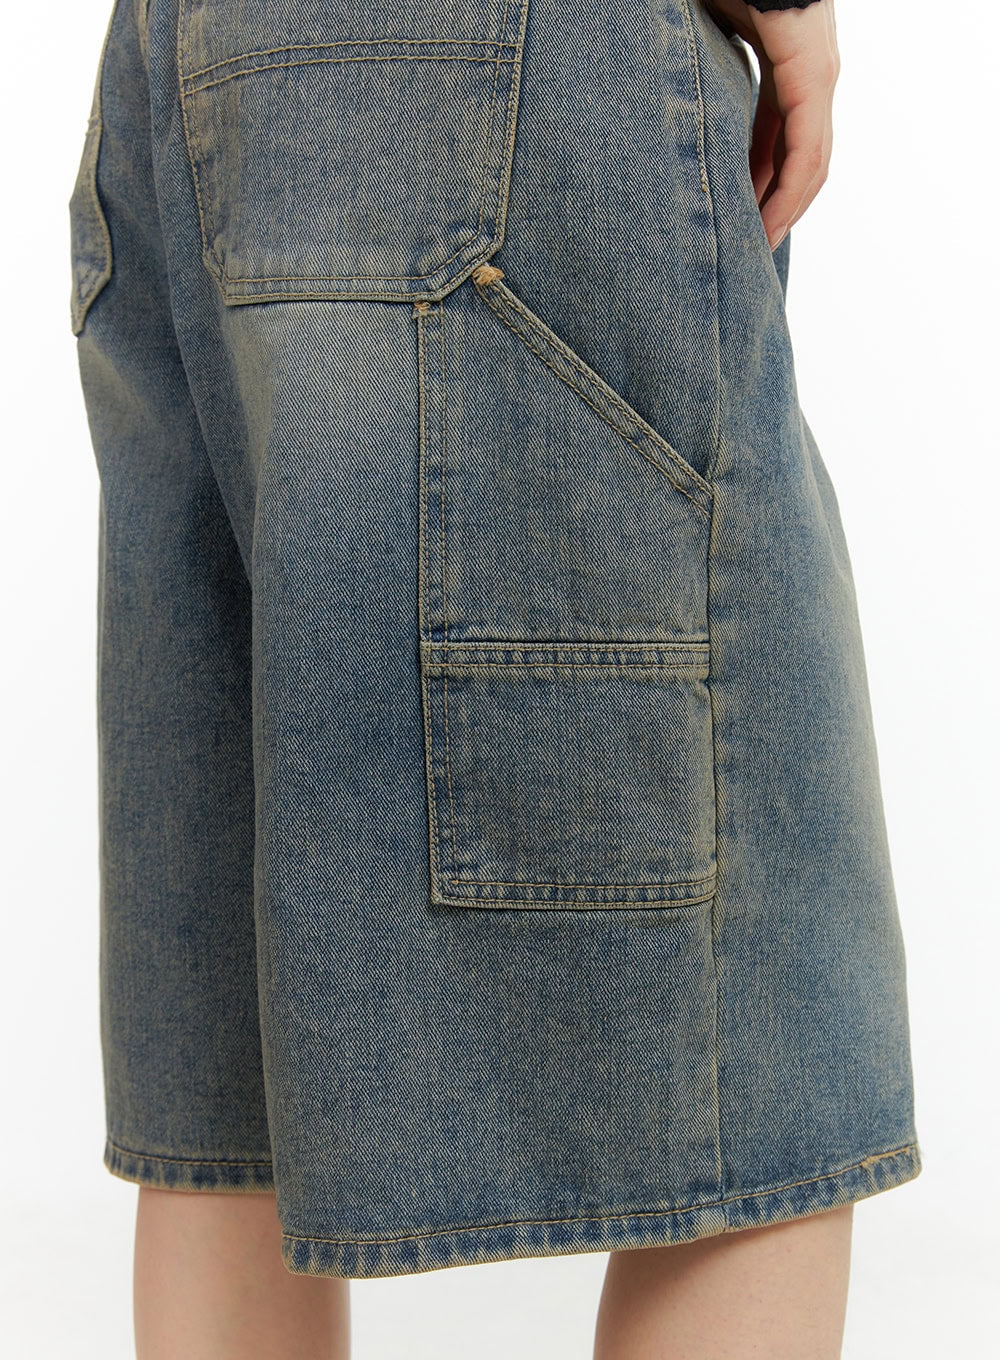 washed-baggy-jorts-cl401